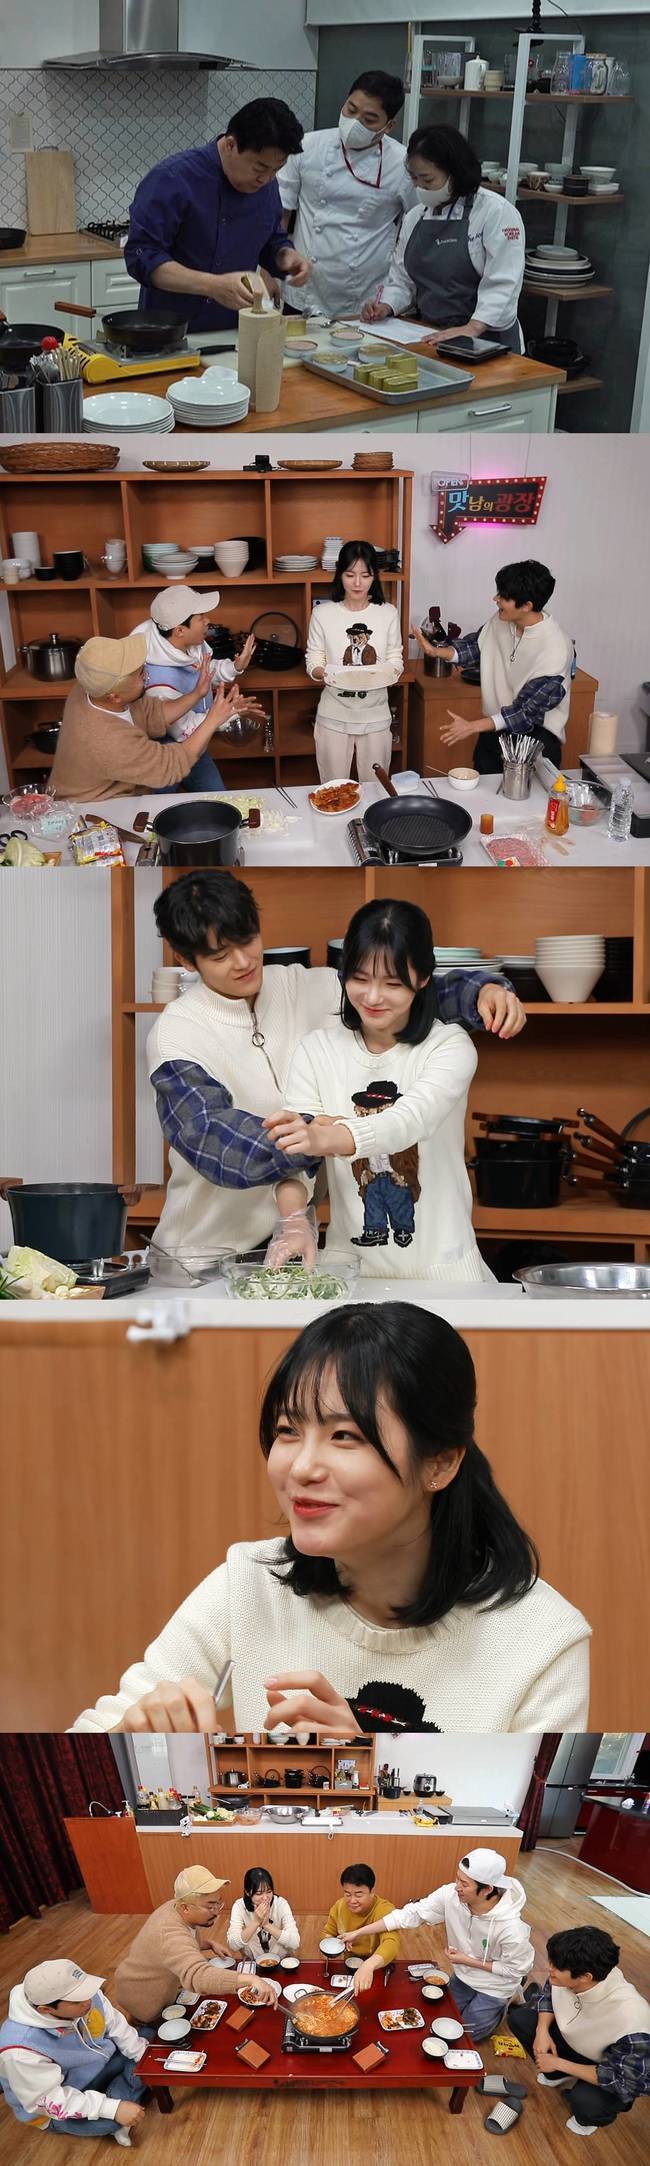 Actor Shin Ye-eun, who has emerged as a Daese Loco Fairy in Webb Goddess, will appear on SBS Delicious Rendezvous.On SBS Delicious Rendezvous, which is broadcasted at 9 pm on January 28, he is shown to save the domestic product Pork hind legs with guest Shin Ye-eun.Domestic product Pork hind legs are less known to consumers than popular areas such as pork belly and neck.Consumption of preferred parts is increasing, while unpopular parts such as hind legs are sluggish. It was surprising that the stock of hind legs is over 40,000 tons.To address the serious sluggish consumption, the Handon Association requested an emergency SOS to the Delicious Rendezvous.The third meeting was held after Yeongcheon in Gyeongbuk and Wando in Jeonnam.Baek Jong-won, who heard the troubles, started to develop canned ham using domestic product Pork hind legs to promote consumption.The Baek Jong-won table domestic product Pork hind legs ham, which was born after several tests, will soon be sold at the mart.On the other hand, actor Shin Ye-eun, who is called Webb Goddess came to Delicious Rendezvous on this day.Shin Ye-eun, who showed shyness in his first meeting with Nong benjas, soon showed off his dream of performing arts by realizing romance (?) such as moving at the moment of filming.In addition, he cooked with Kim Dong-joon, who appeared in the drama The Number of Cases, and boasted a unique breath like a newlywed couple.On this day, Kim Dong-joon is the back door that replaced the cutting or the sleeves for the Shin Ye-eun who was not good at cooking, and bought the envy of the members.Shin Ye-euns mischievous charm and Kim Dong-joon and the strange airflow of Thumb (?) are released on this broadcast.Baek Jong-won unveiled a recipe for kimchi stew with domestic product Pork back legs.Kim Hee-chul was worried that he could disclose the recipe for the store.But for a while, Nong Benjas inhaled storms from kimchi stew to the army, and Shin Ye-eun did not hide his envy, saying, Do you eat this every week?The Baek Jong-won table Pork hind legs dish that impressed Nong Benjamin and Shin Ye-eun can be found on SBS Delicious Rendezvous which is broadcasted at 9 pm on this day